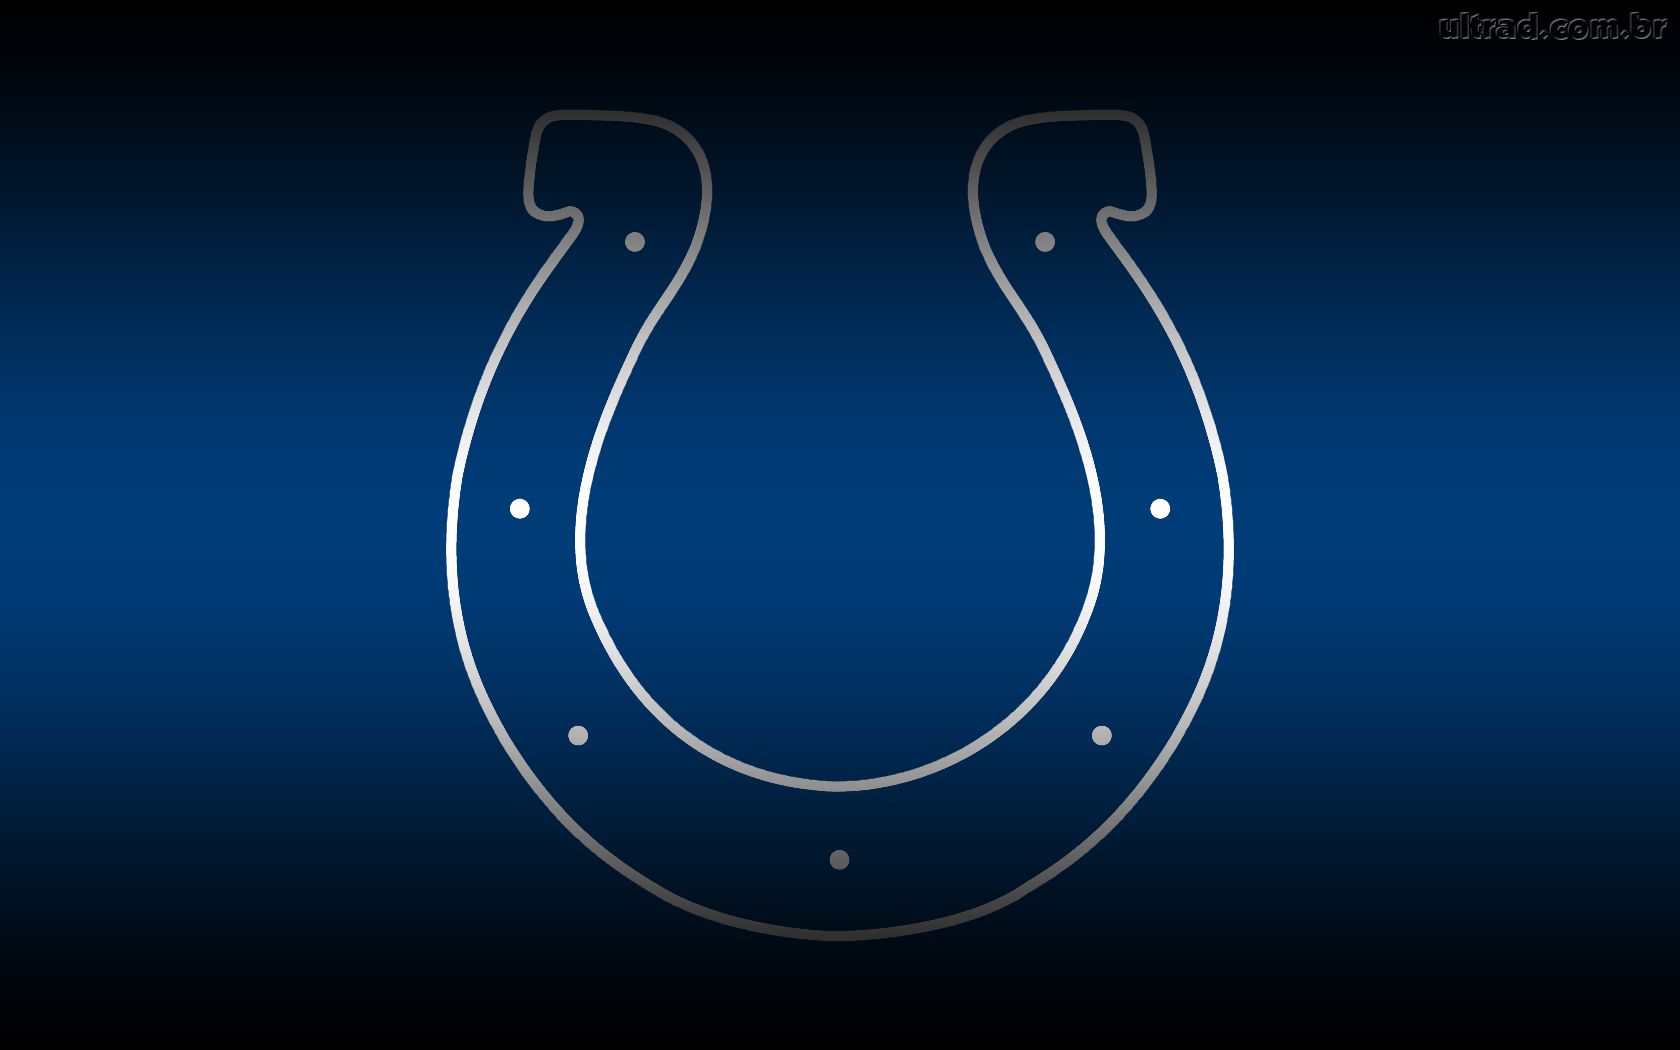 Indianapolis Colts Wallpaper Image On